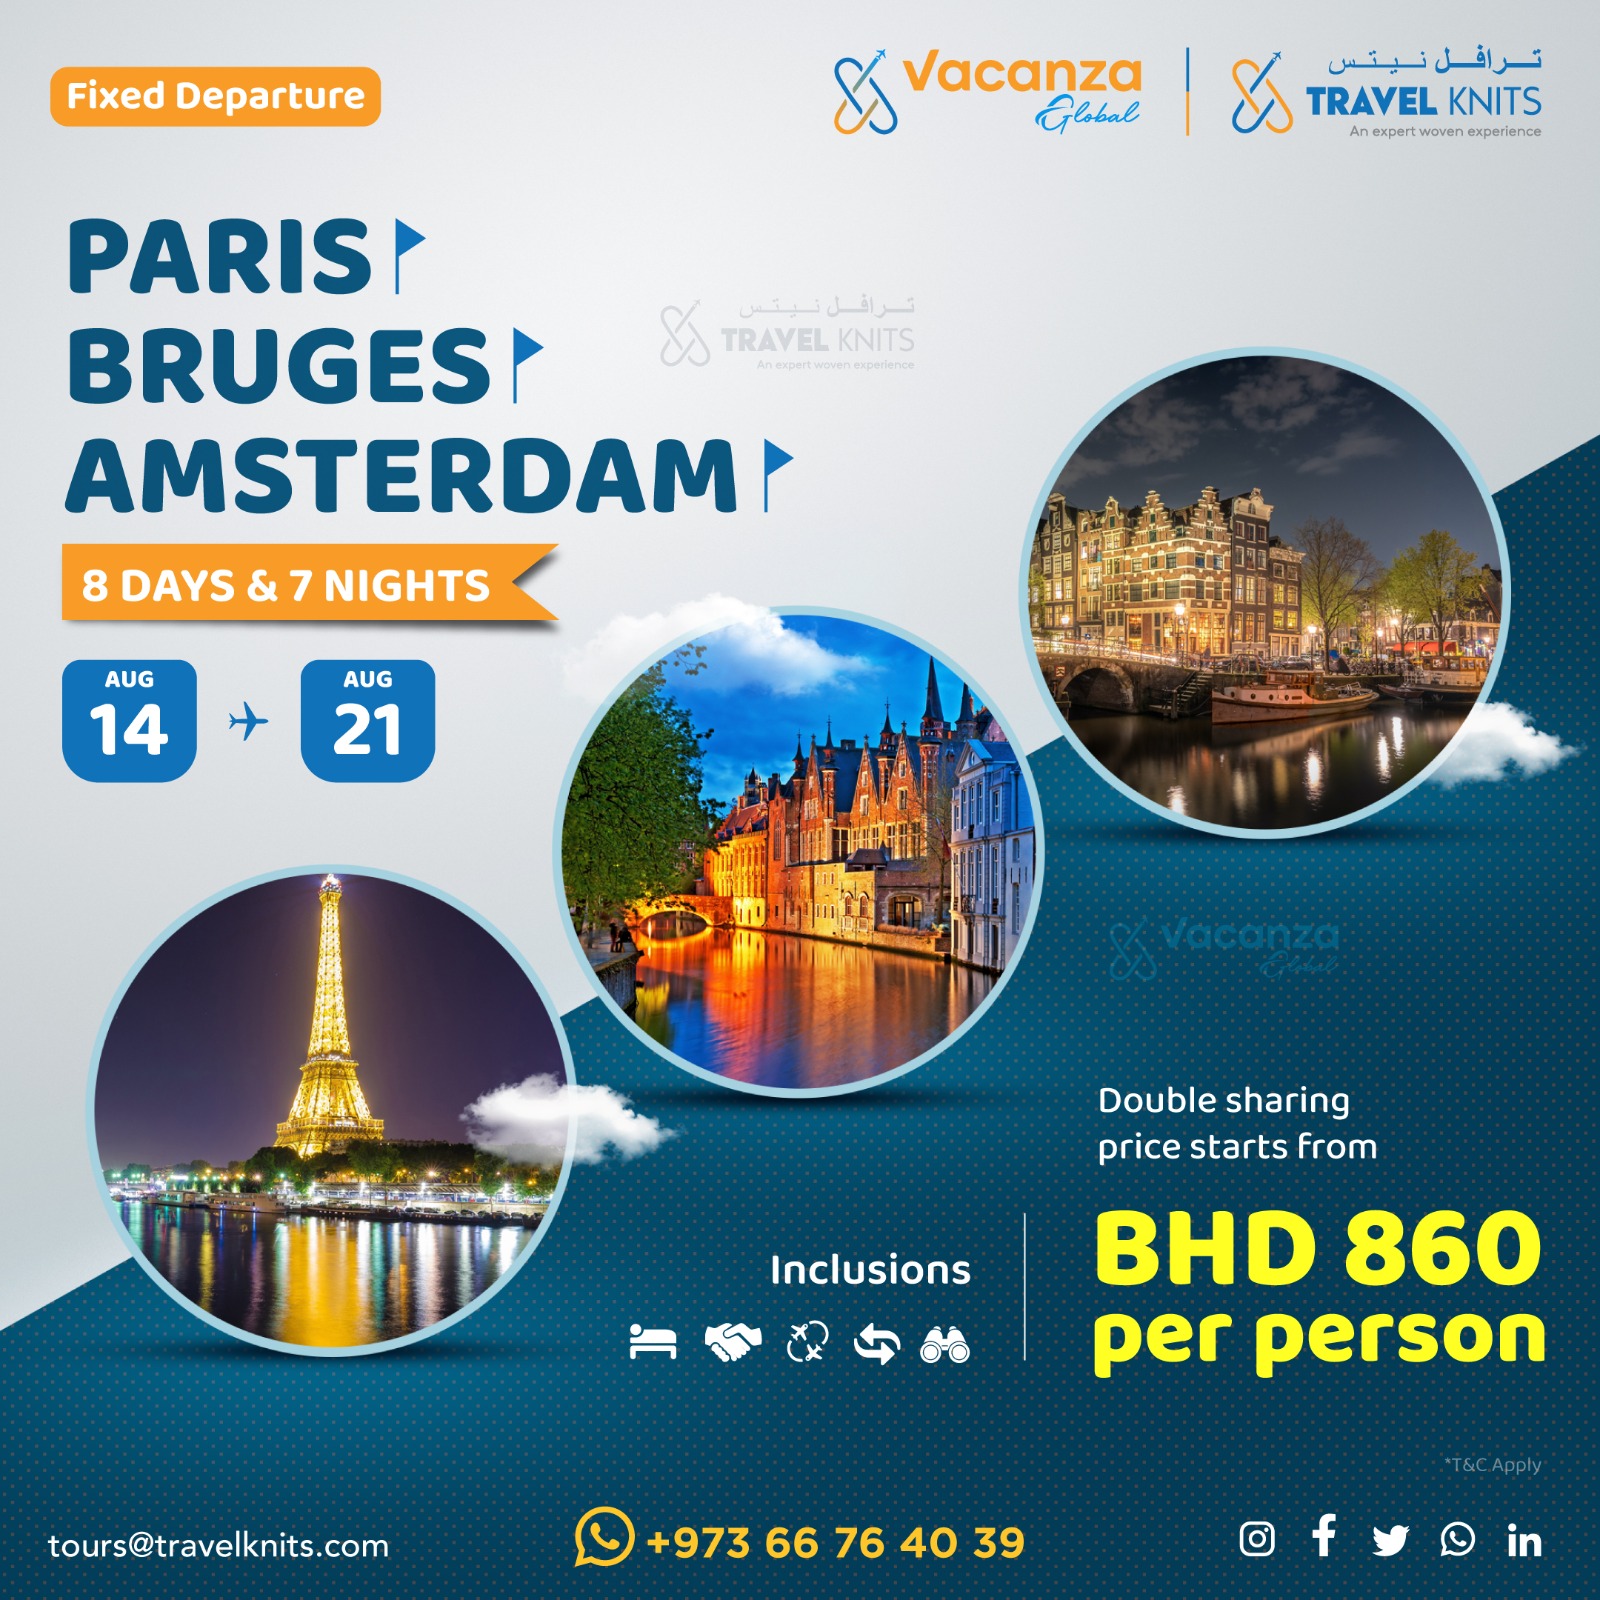 PARIS-BRUGES-AMSTERDAM|FranceTour Packages - Book honeymoon ,family,adventure tour packages to France|Travel Knits												